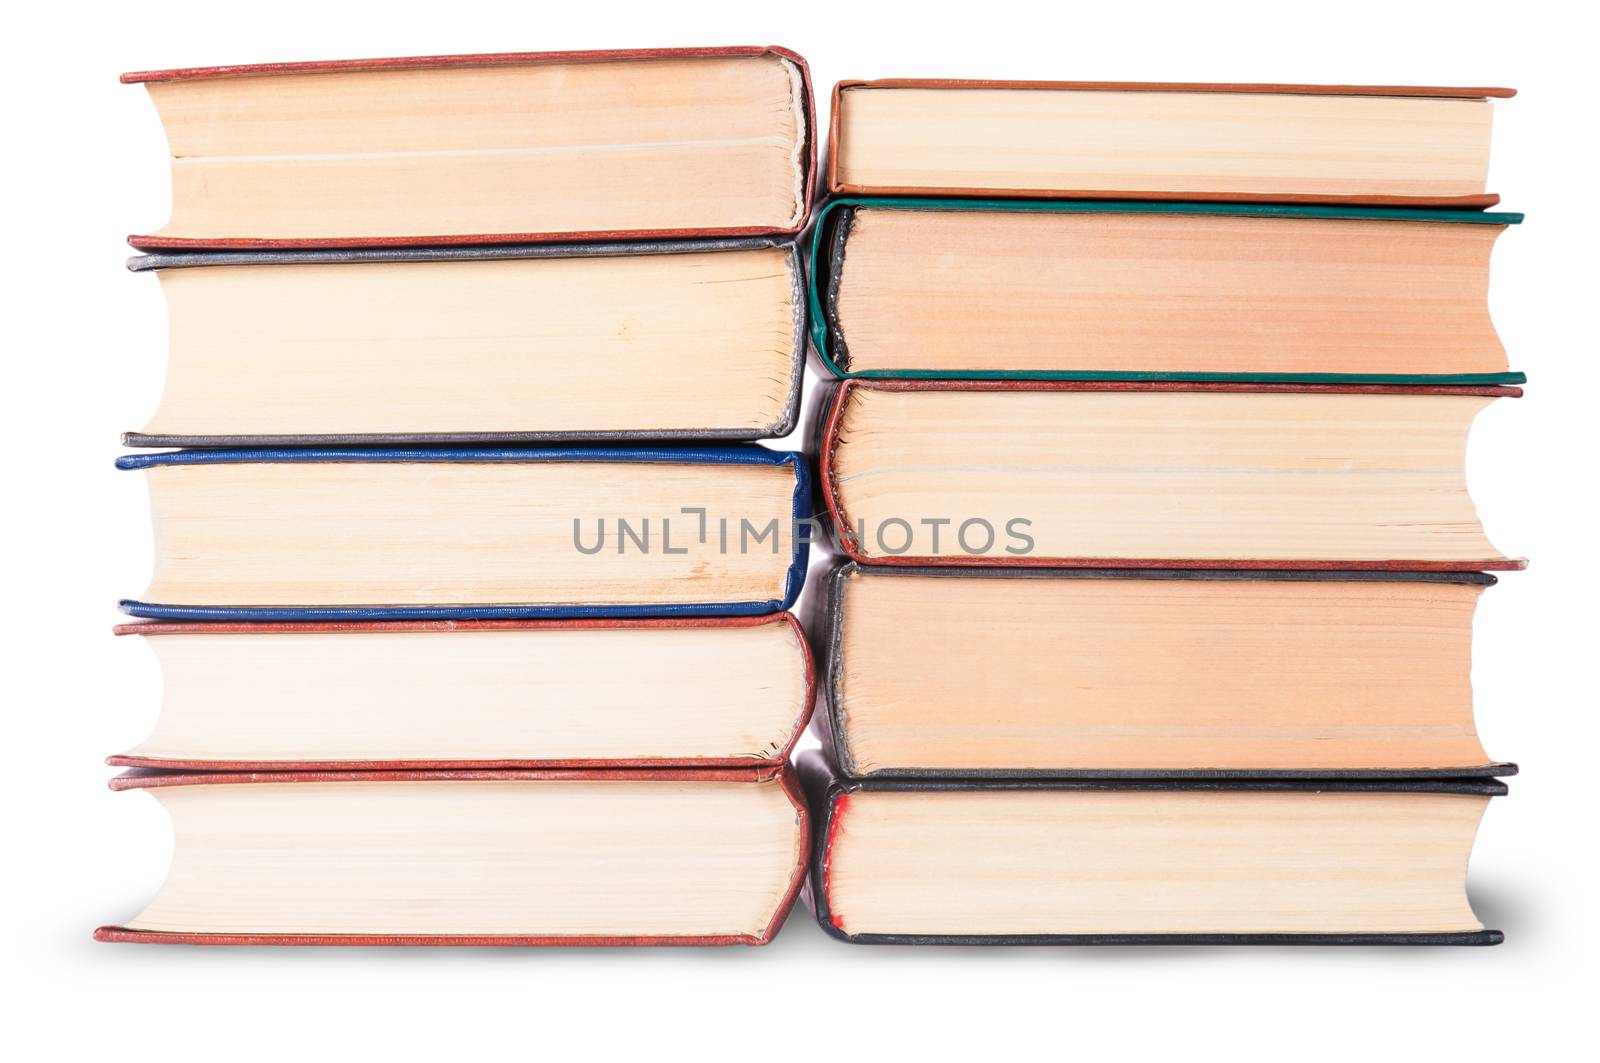 Two stacks of old books isolated on white background